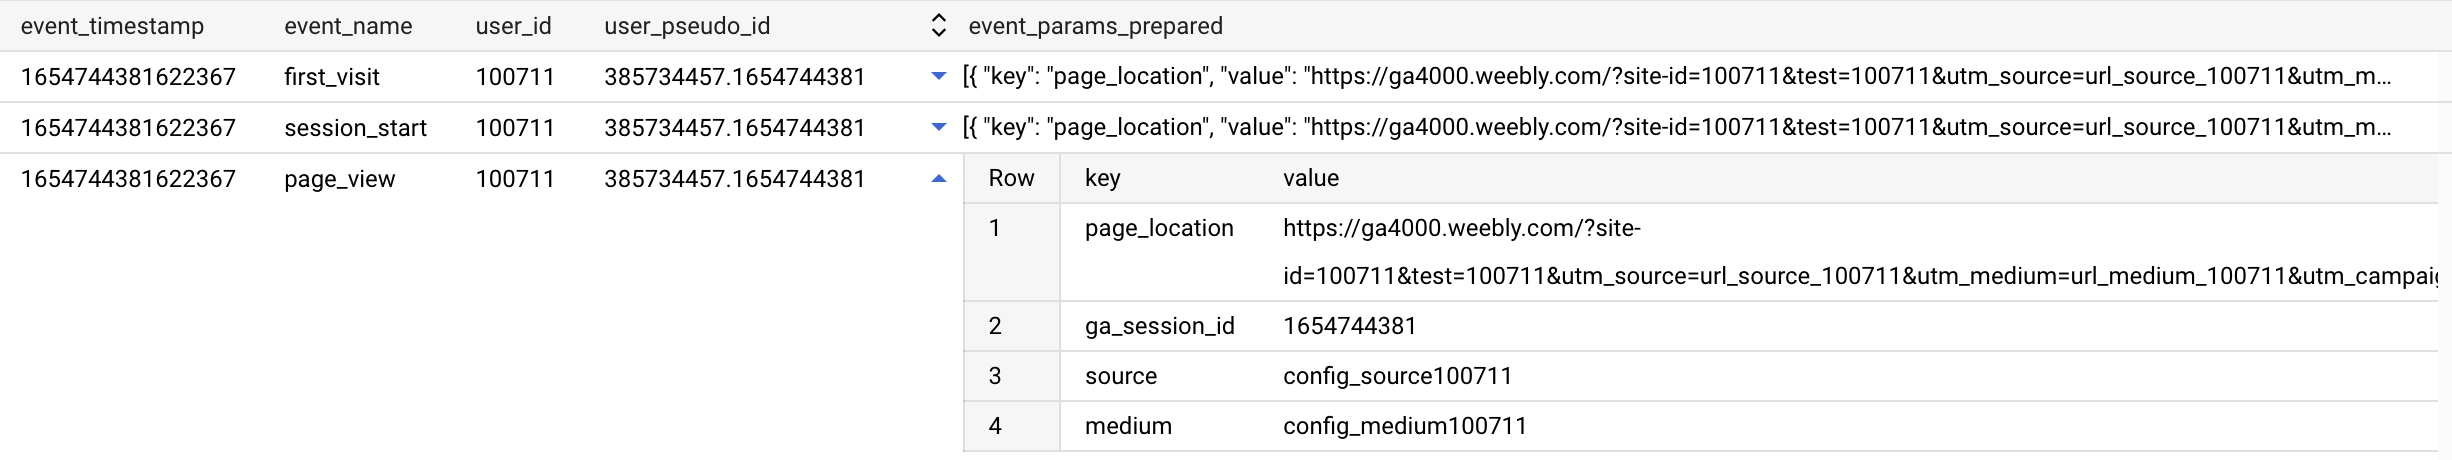 Results in BigQuery